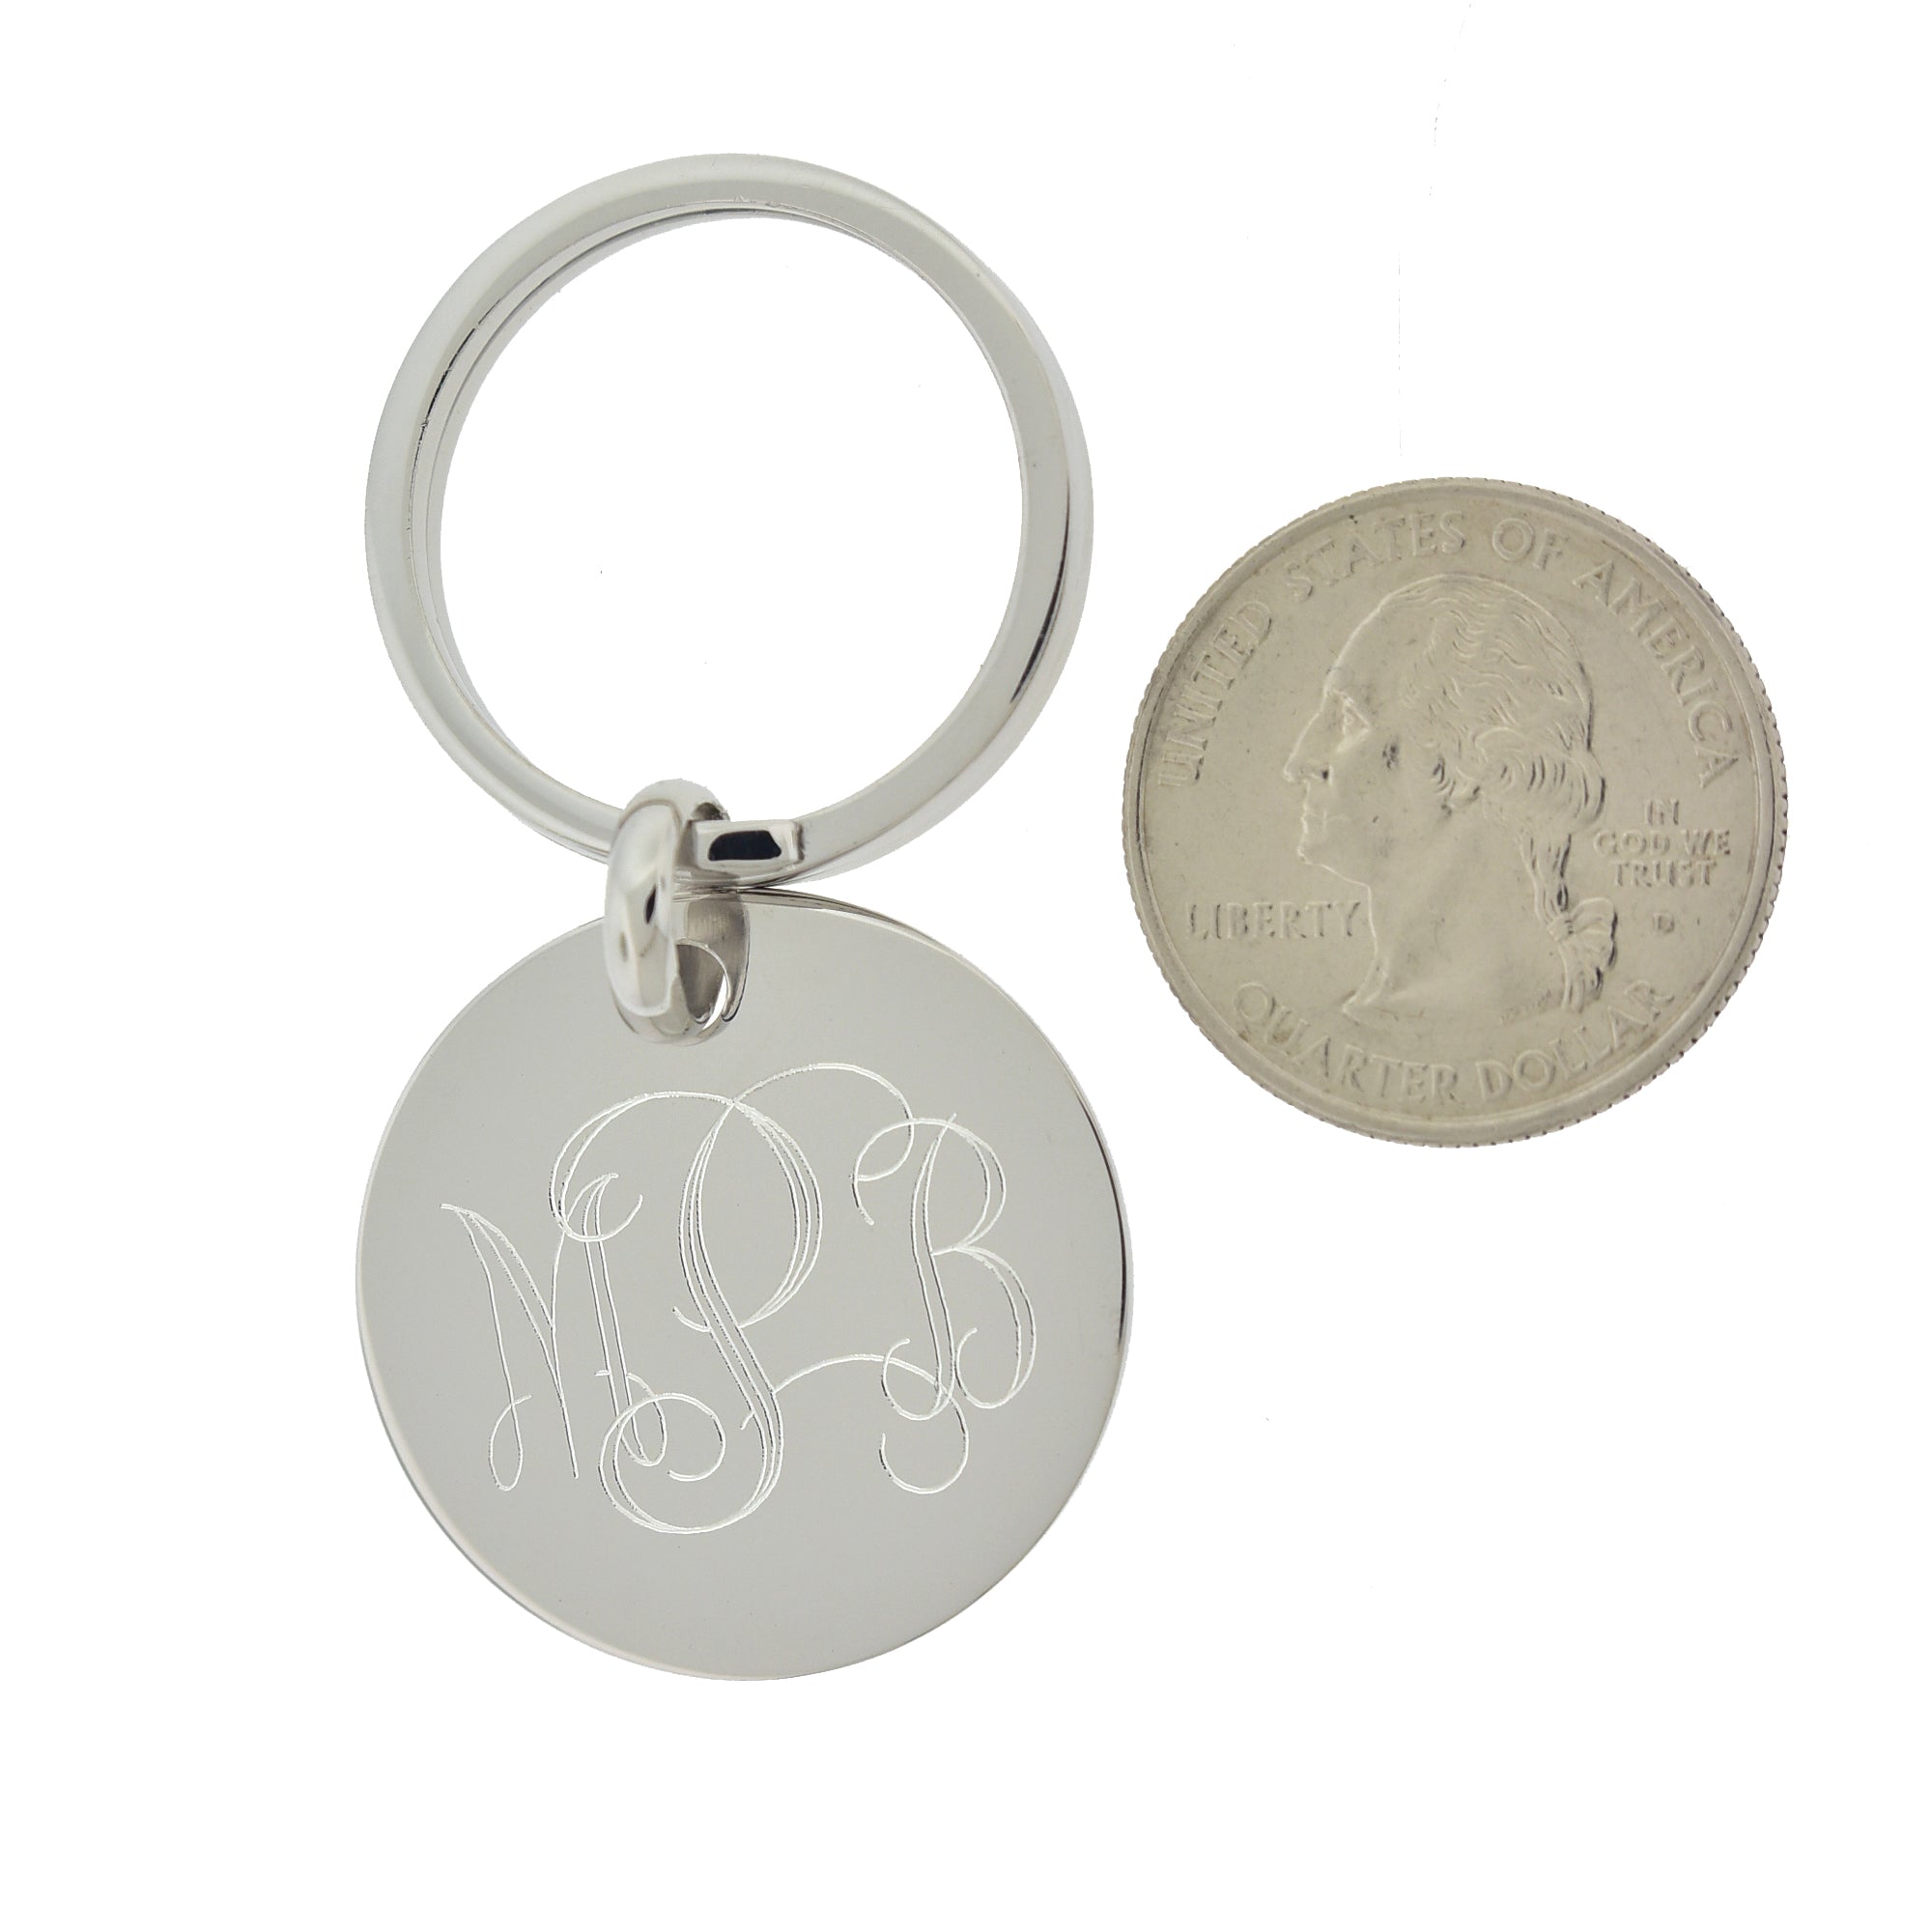 Engravable Sterling Silver Round Key Holder Ring Keychain Personalized Engraved Monogram